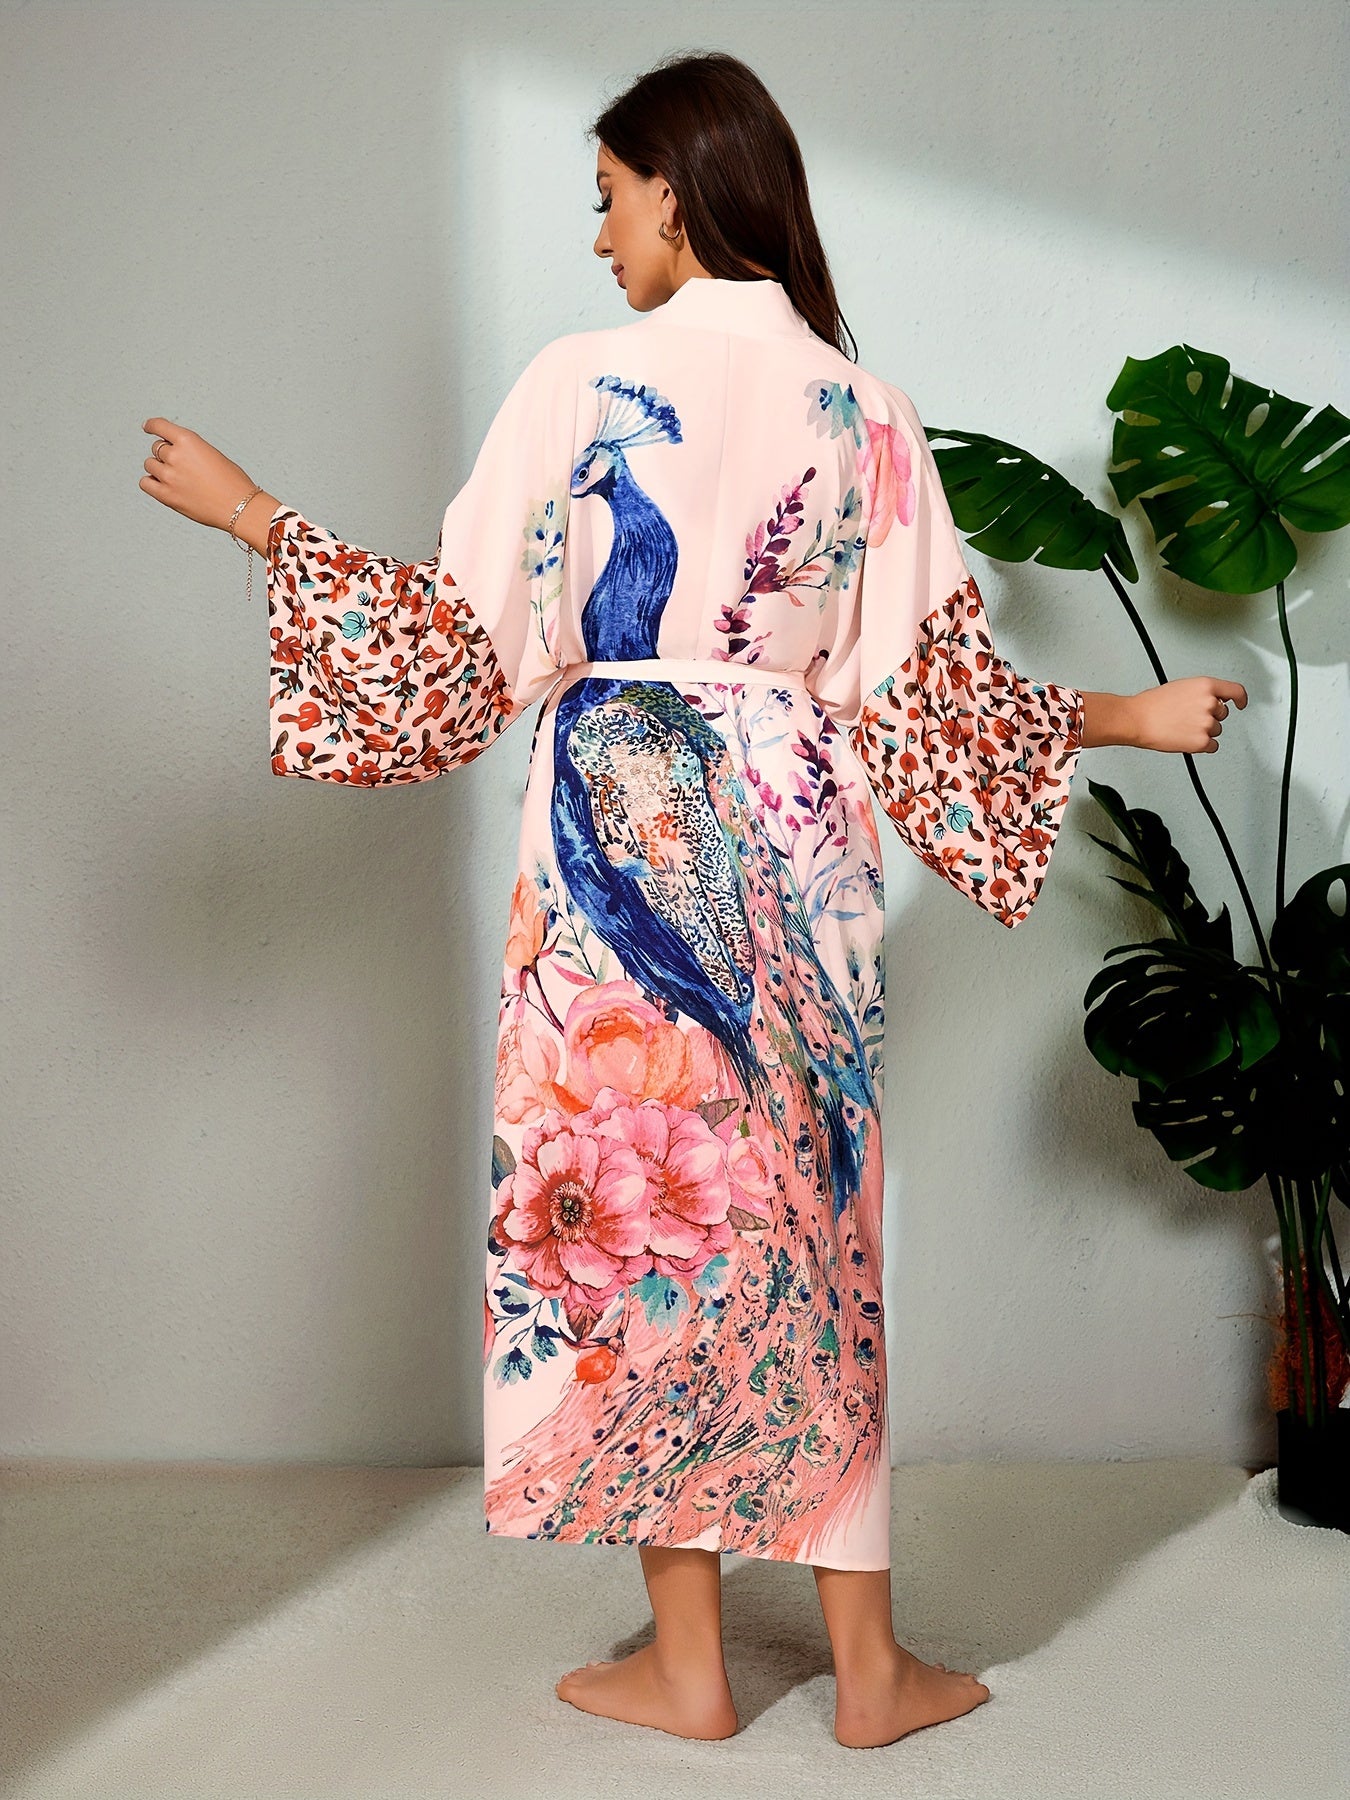 A woman in a long, colorful Maramalive™ Bohemian Style Women's Peacock Print Beach Cover-Up With Belt, Long Sleeves Loose Fit Vacation Kimono stands barefoot, facing away from the camera. A green potted plant is on the right side of the image, adding to the serene atmosphere.